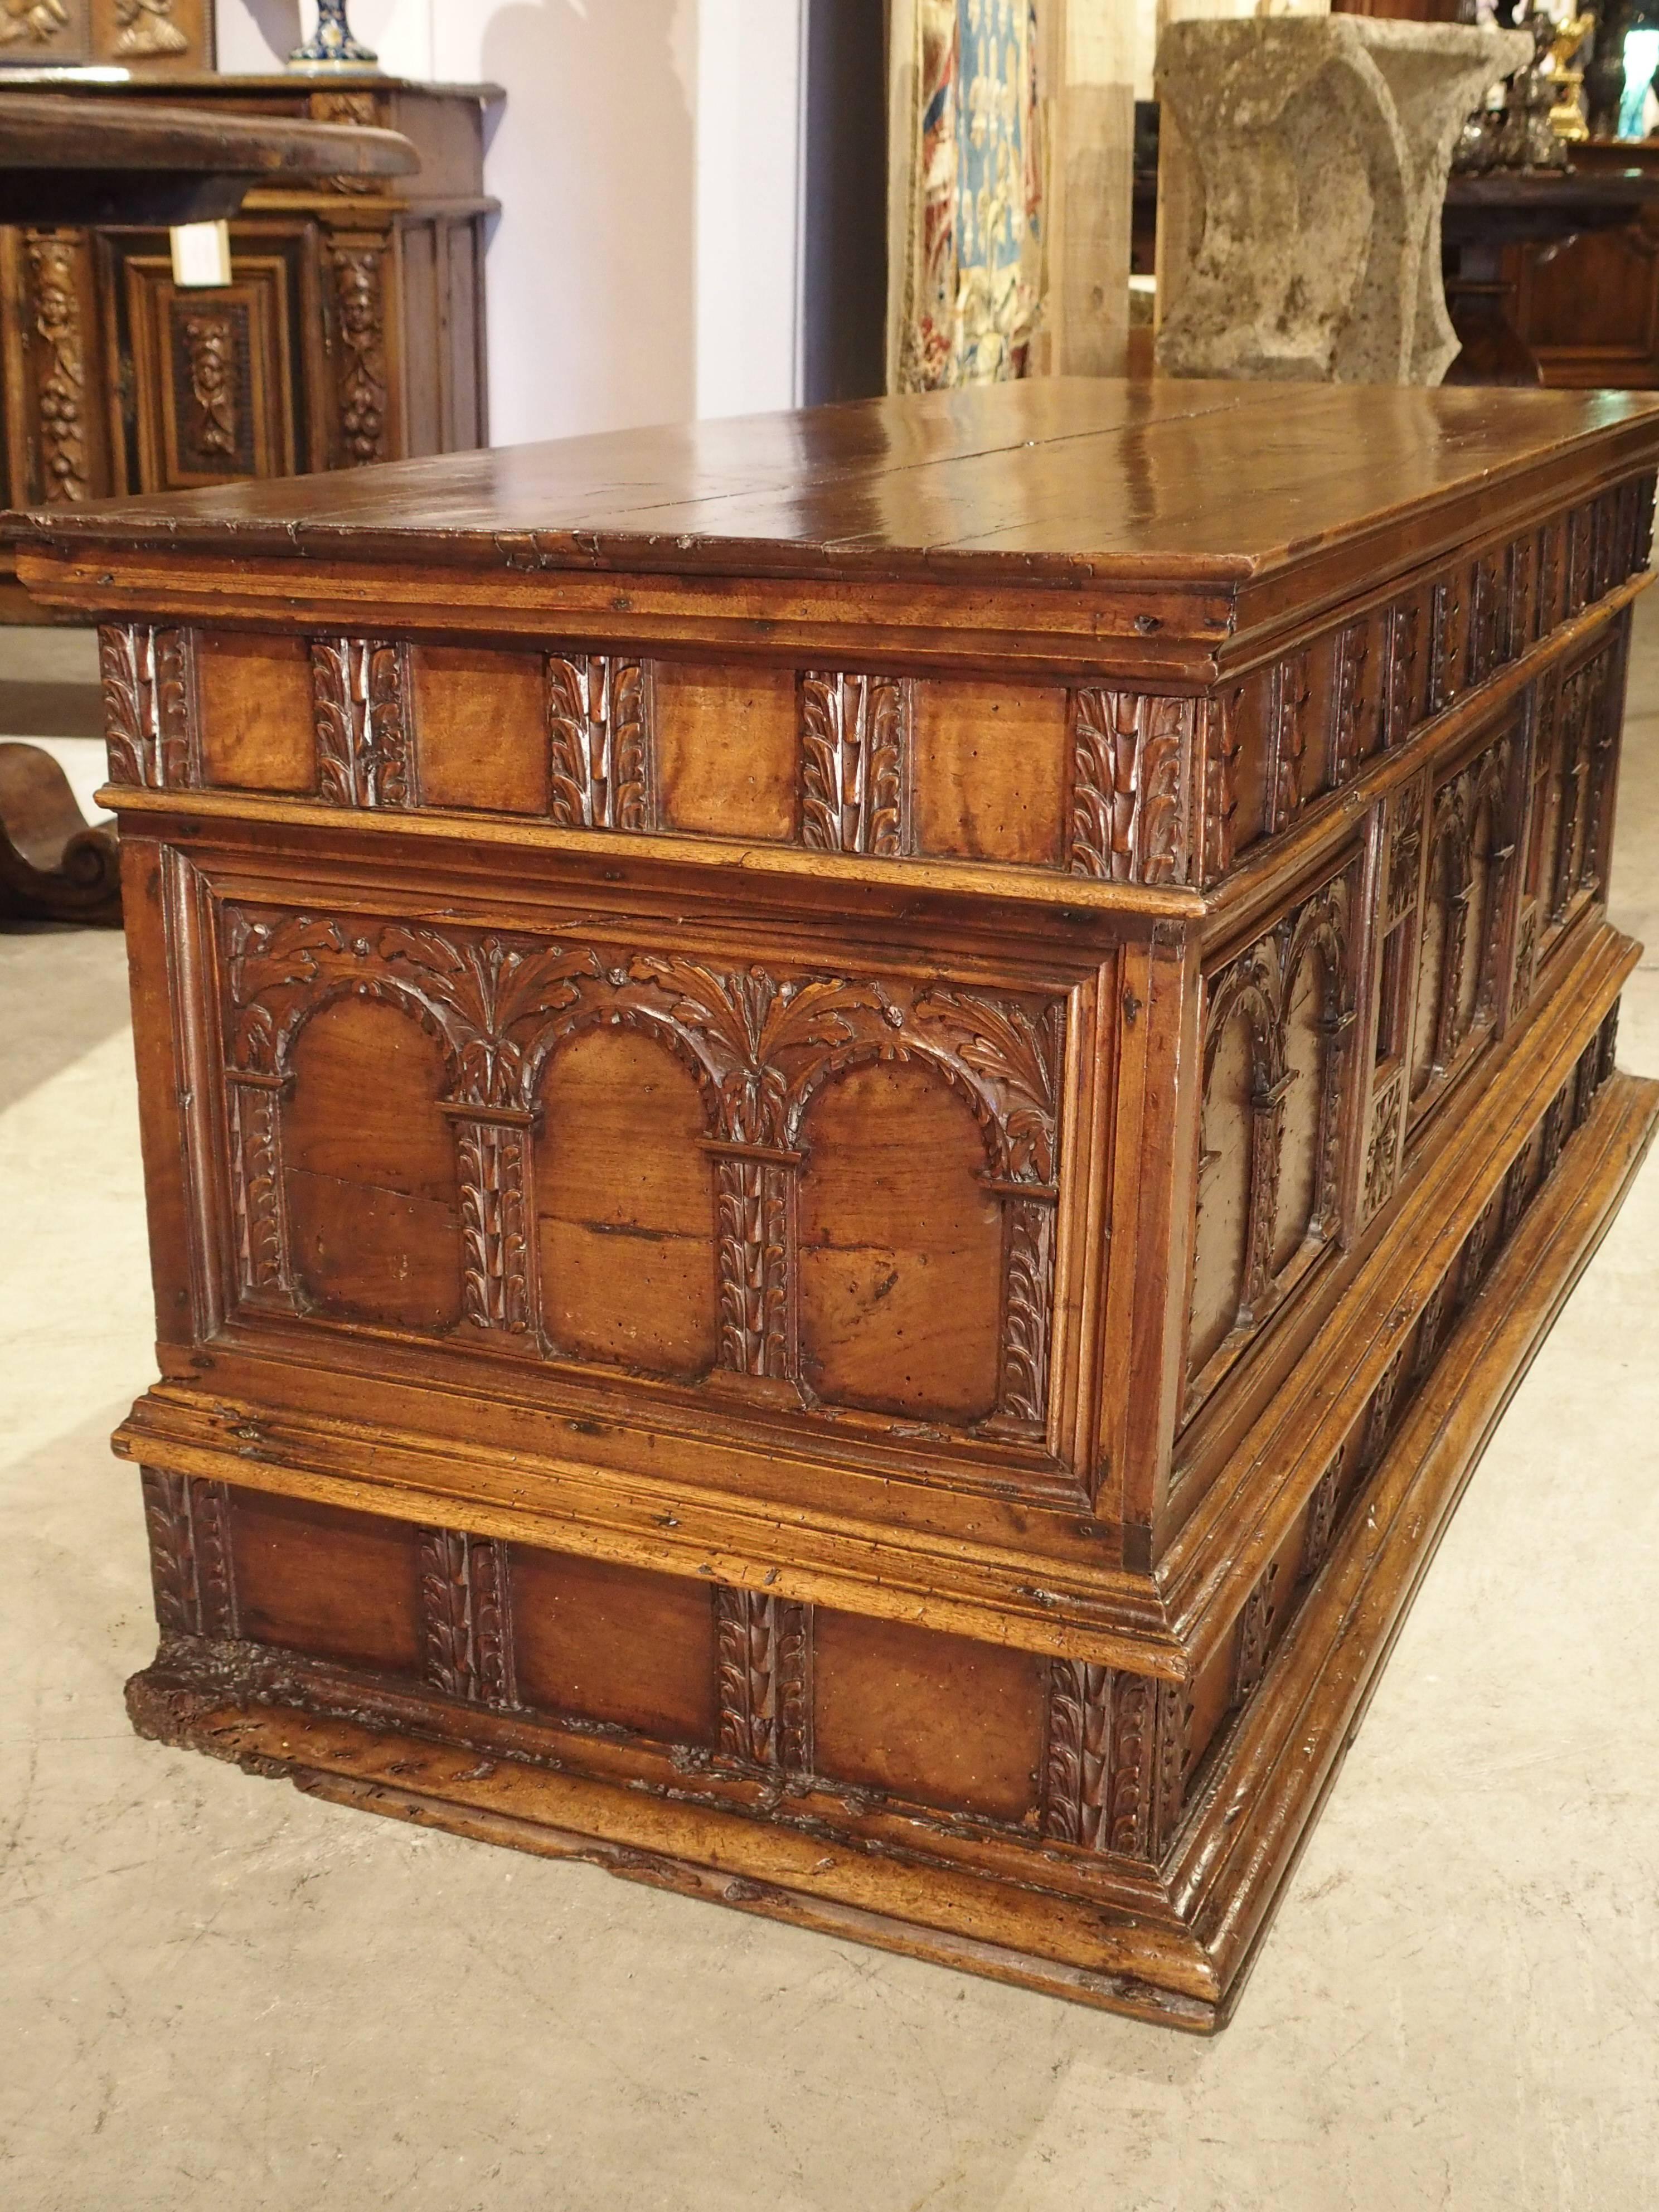 Hand-Carved 18th Century Walnut Wood Trunk from Italy